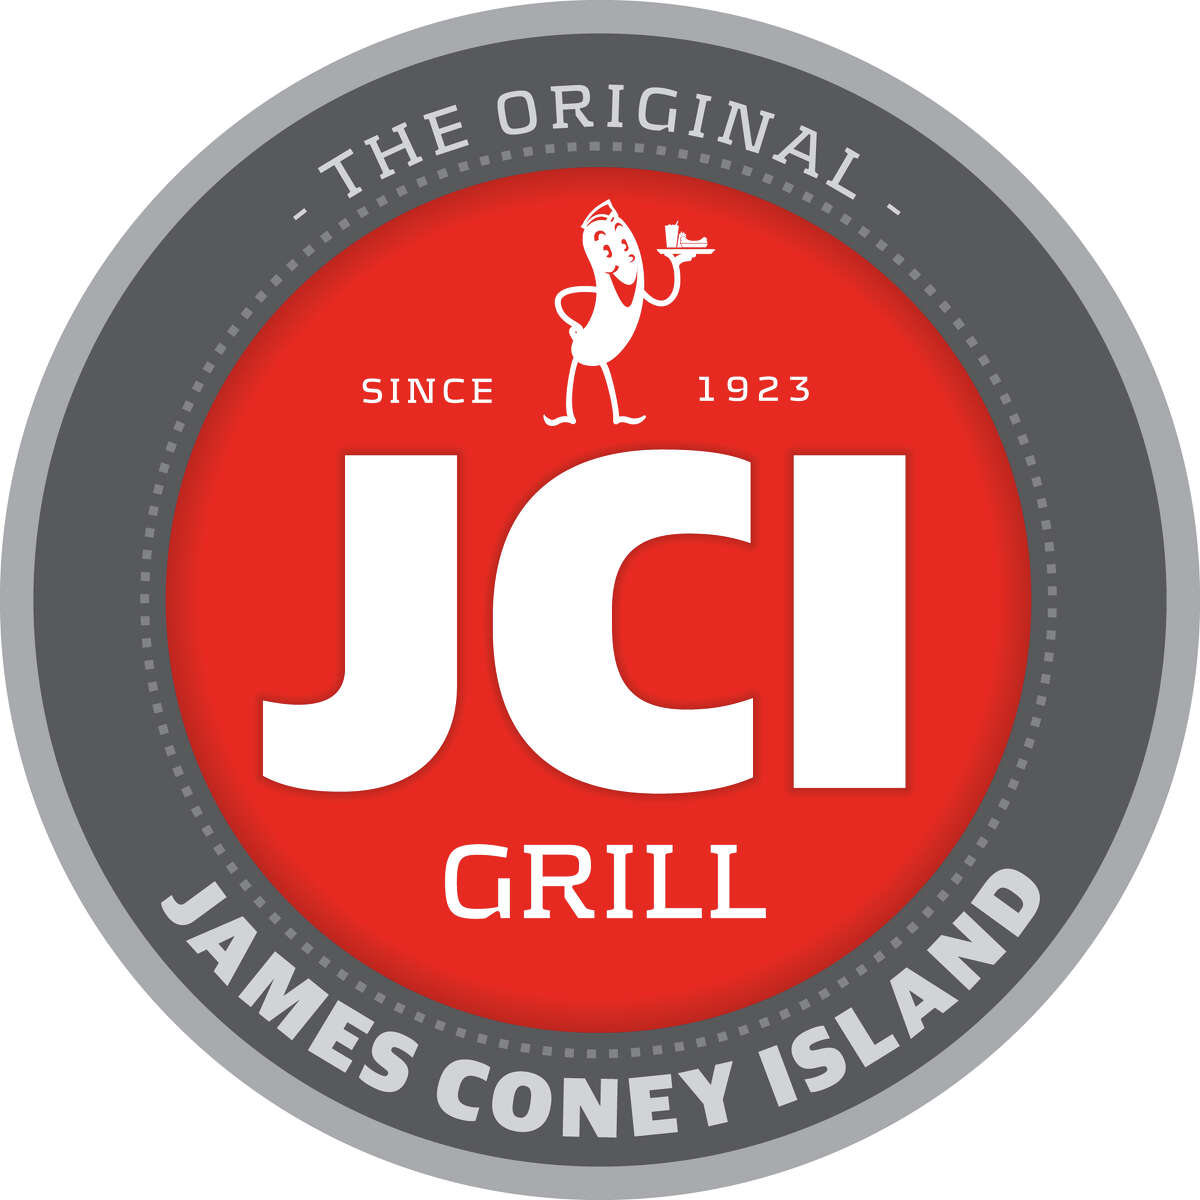 Here's the new logo for the hot dog spot formerly known as James Coney Island.